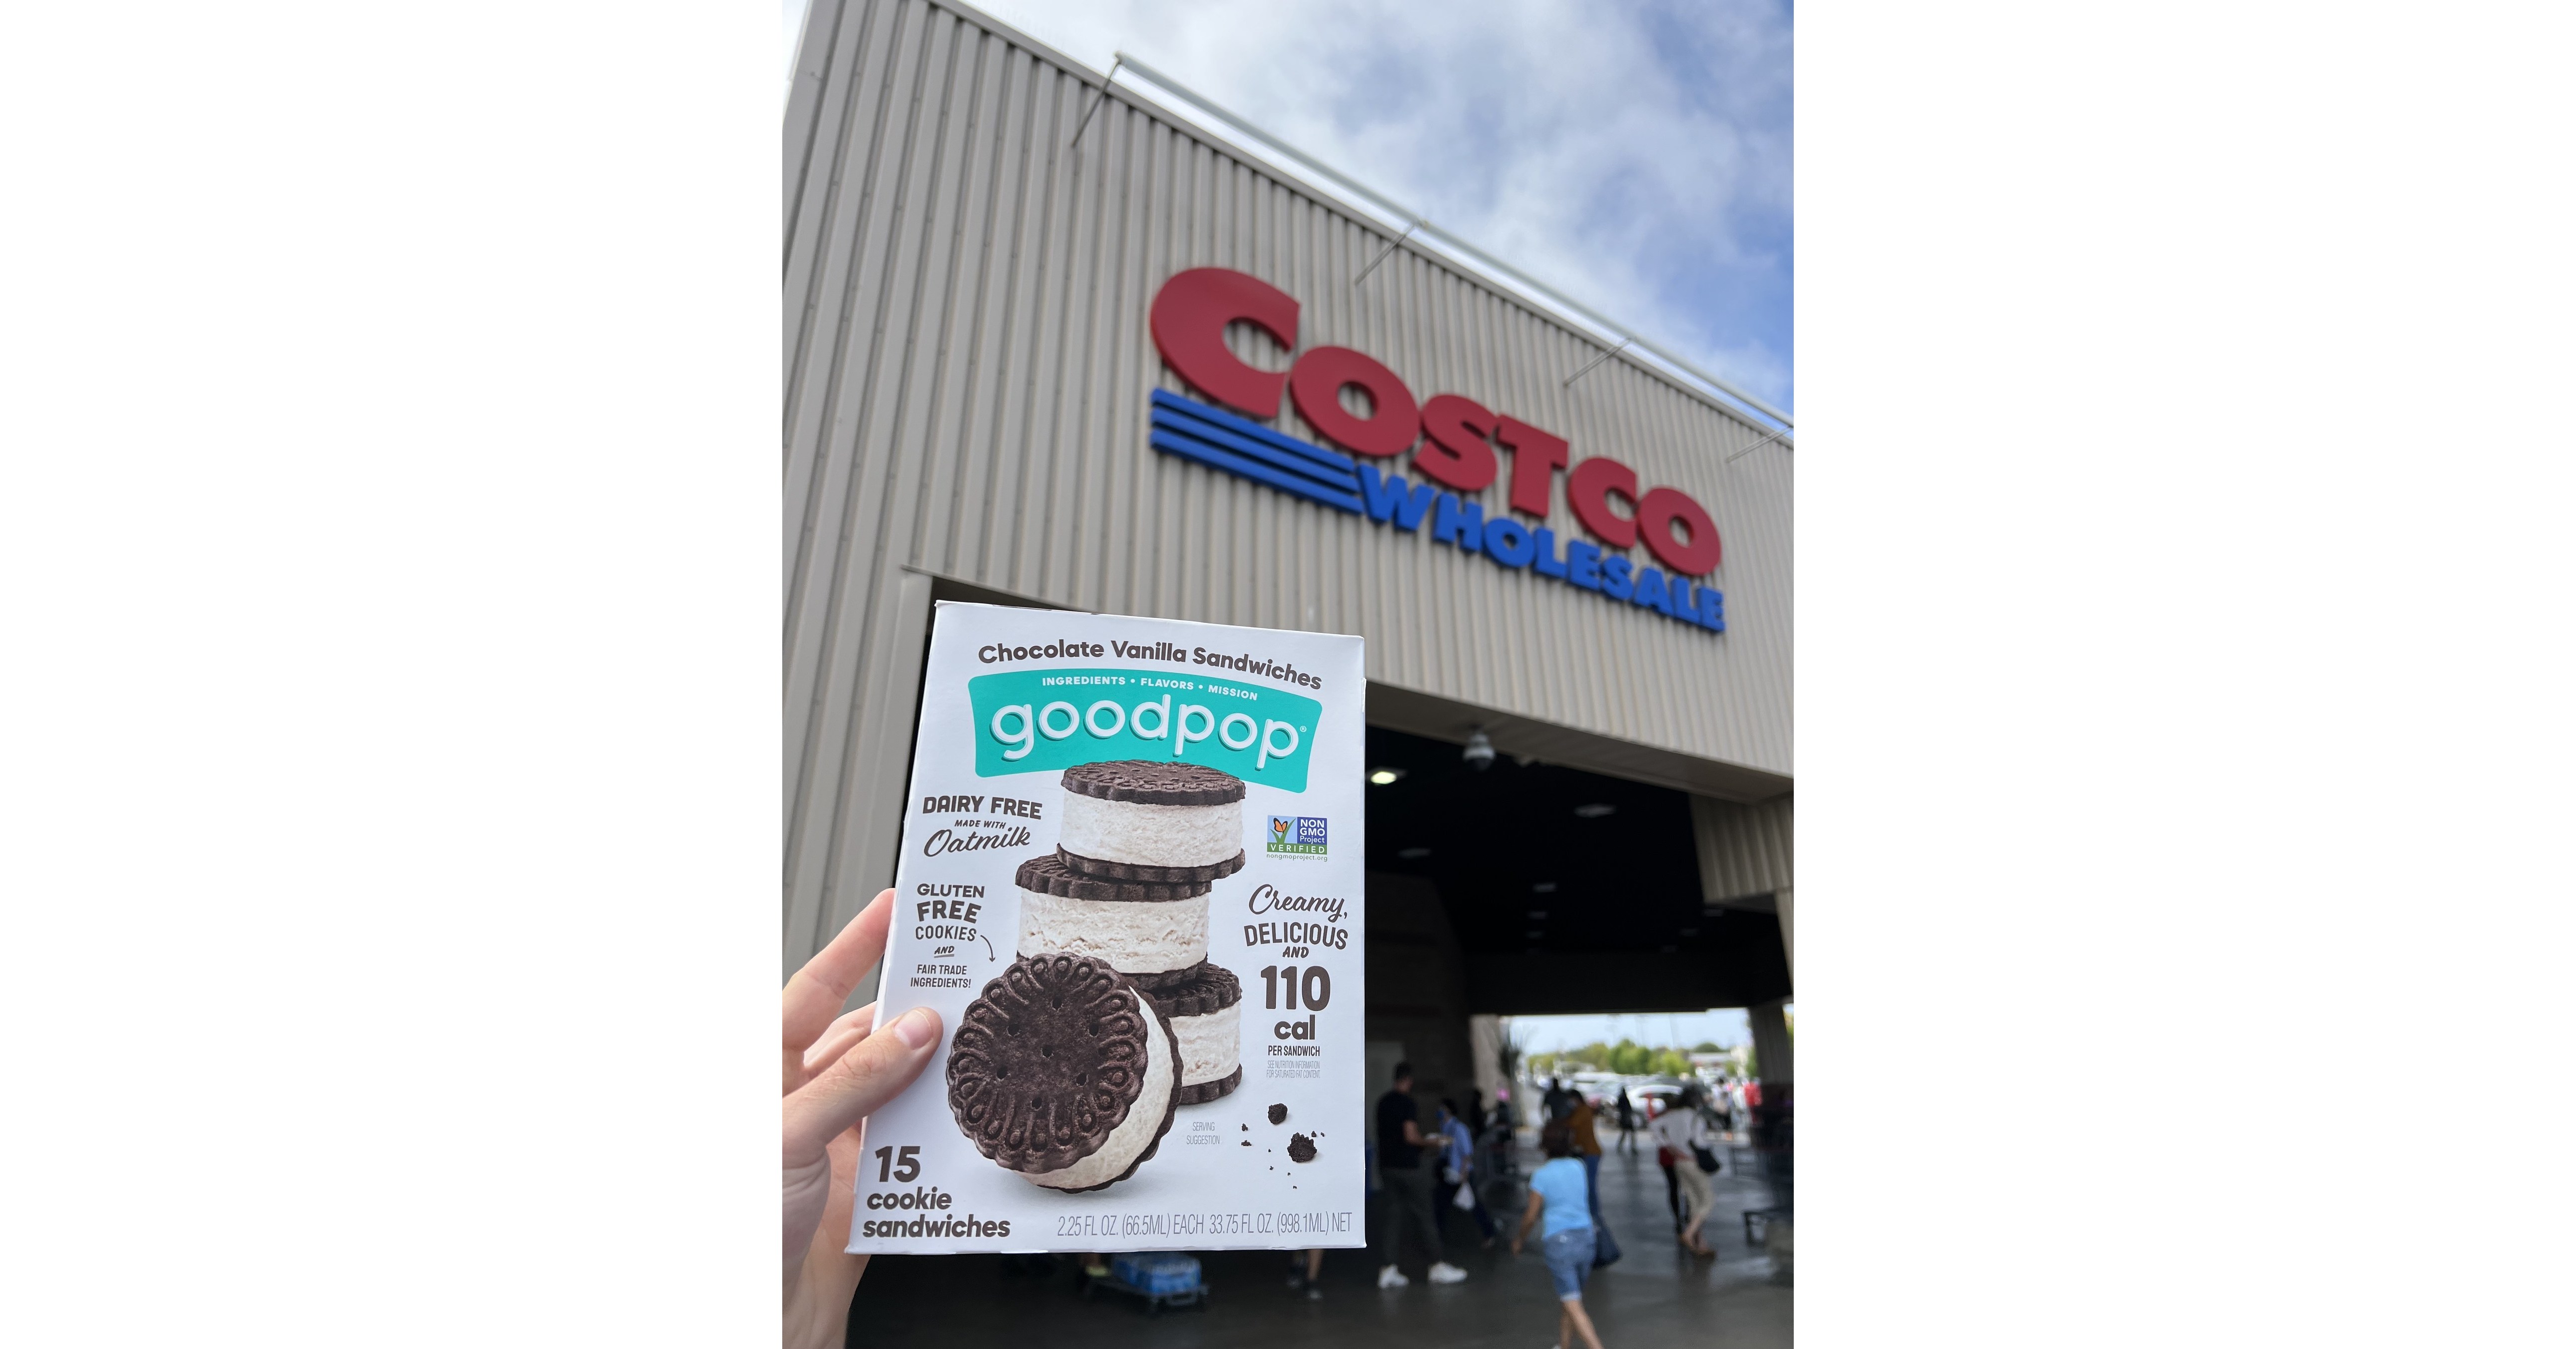 https://mma.prnewswire.com/media/1869417/GoodPop_celebrates_National_Ice_Cream_Sandwich_Day_with_the_announcement_of_a_15_count_box_of_its_ne.jpg?p=facebook